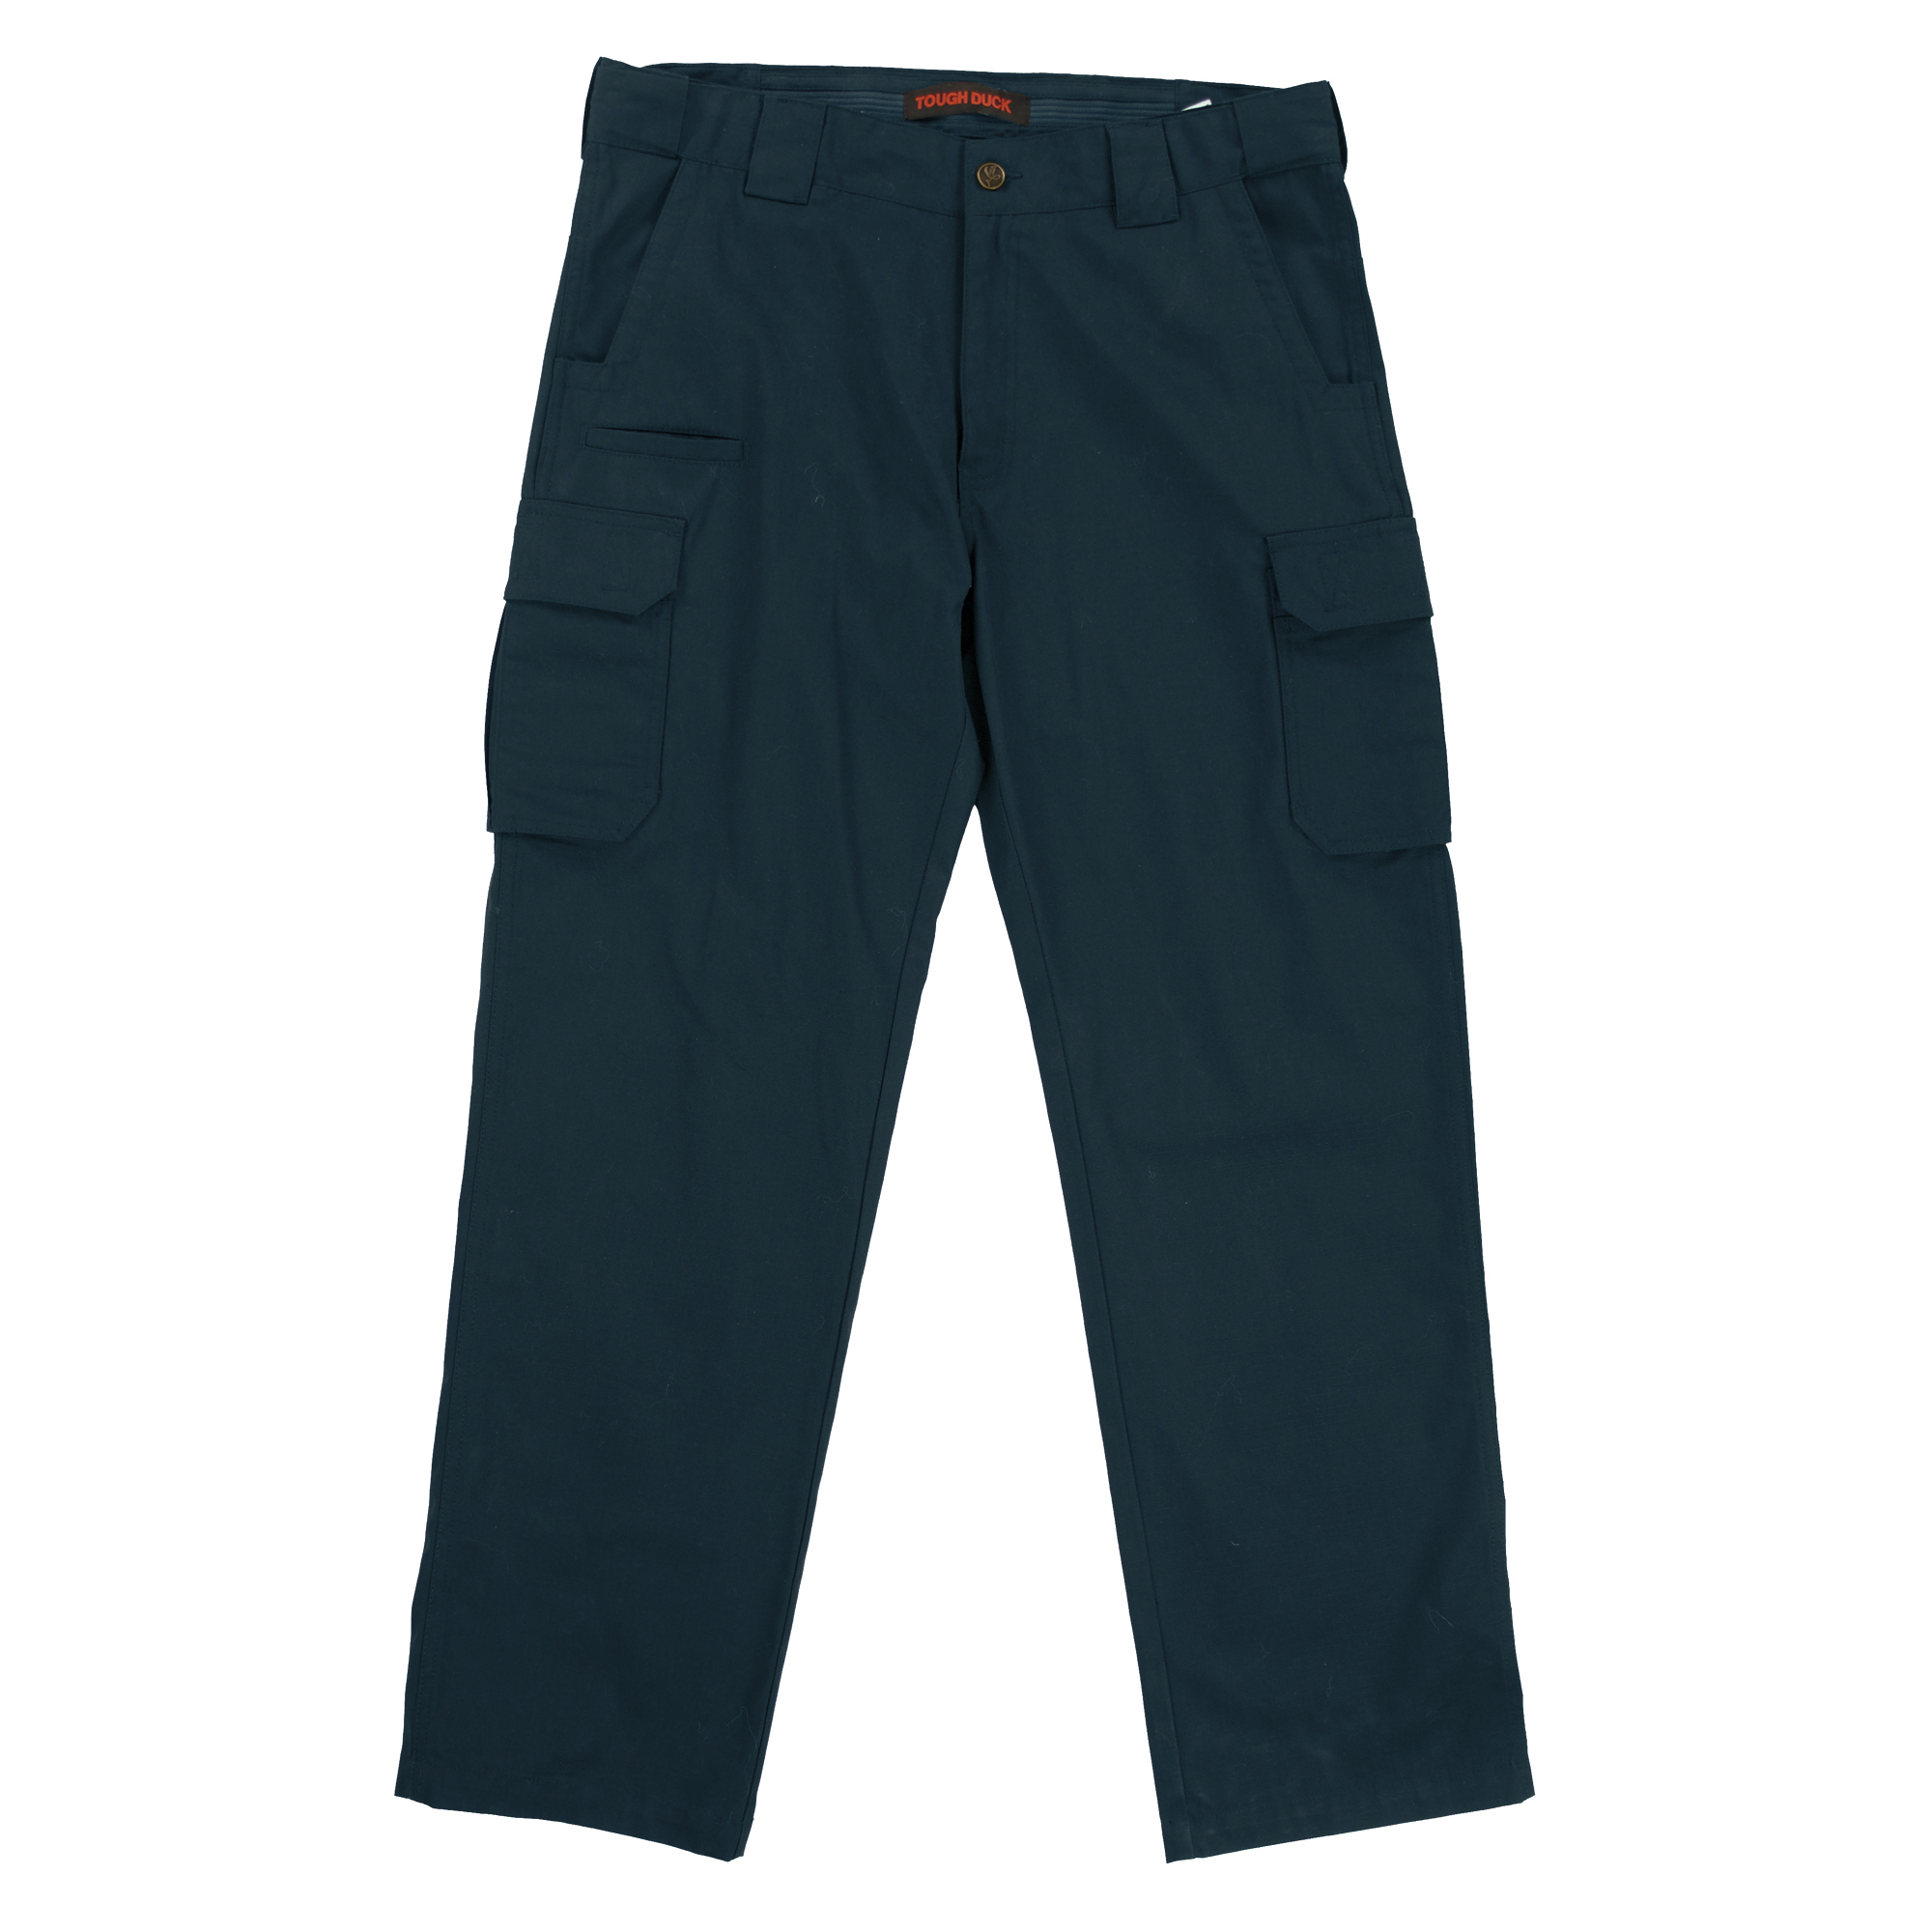 Tough Duck, Ripstop Cargo Pant, Waist 34 in, Inseam 32 in, Color Navy, Model WP111